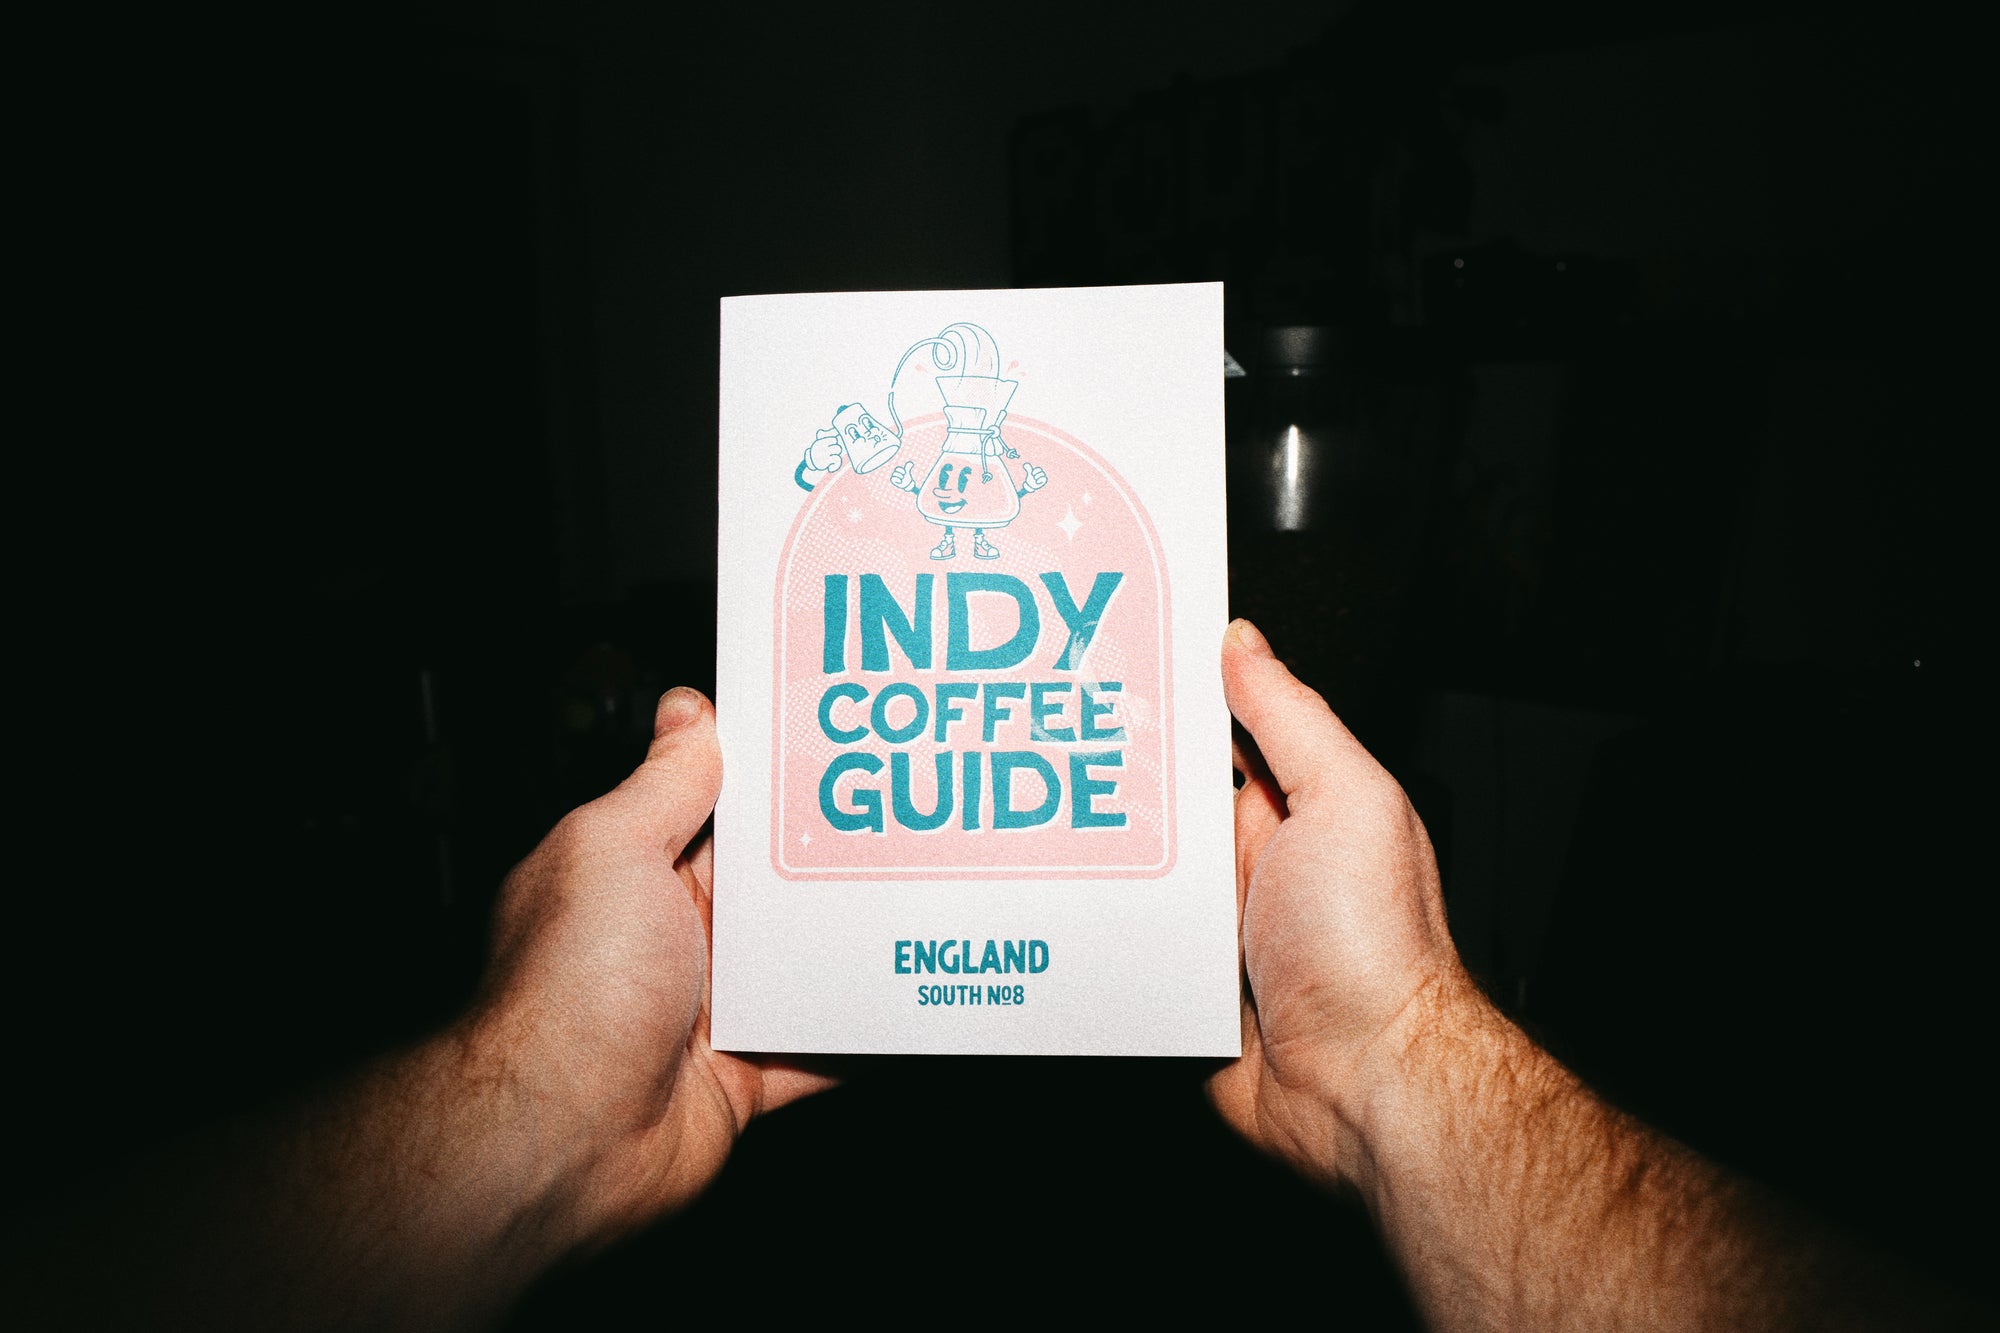 INDY COFFEE GUIDE